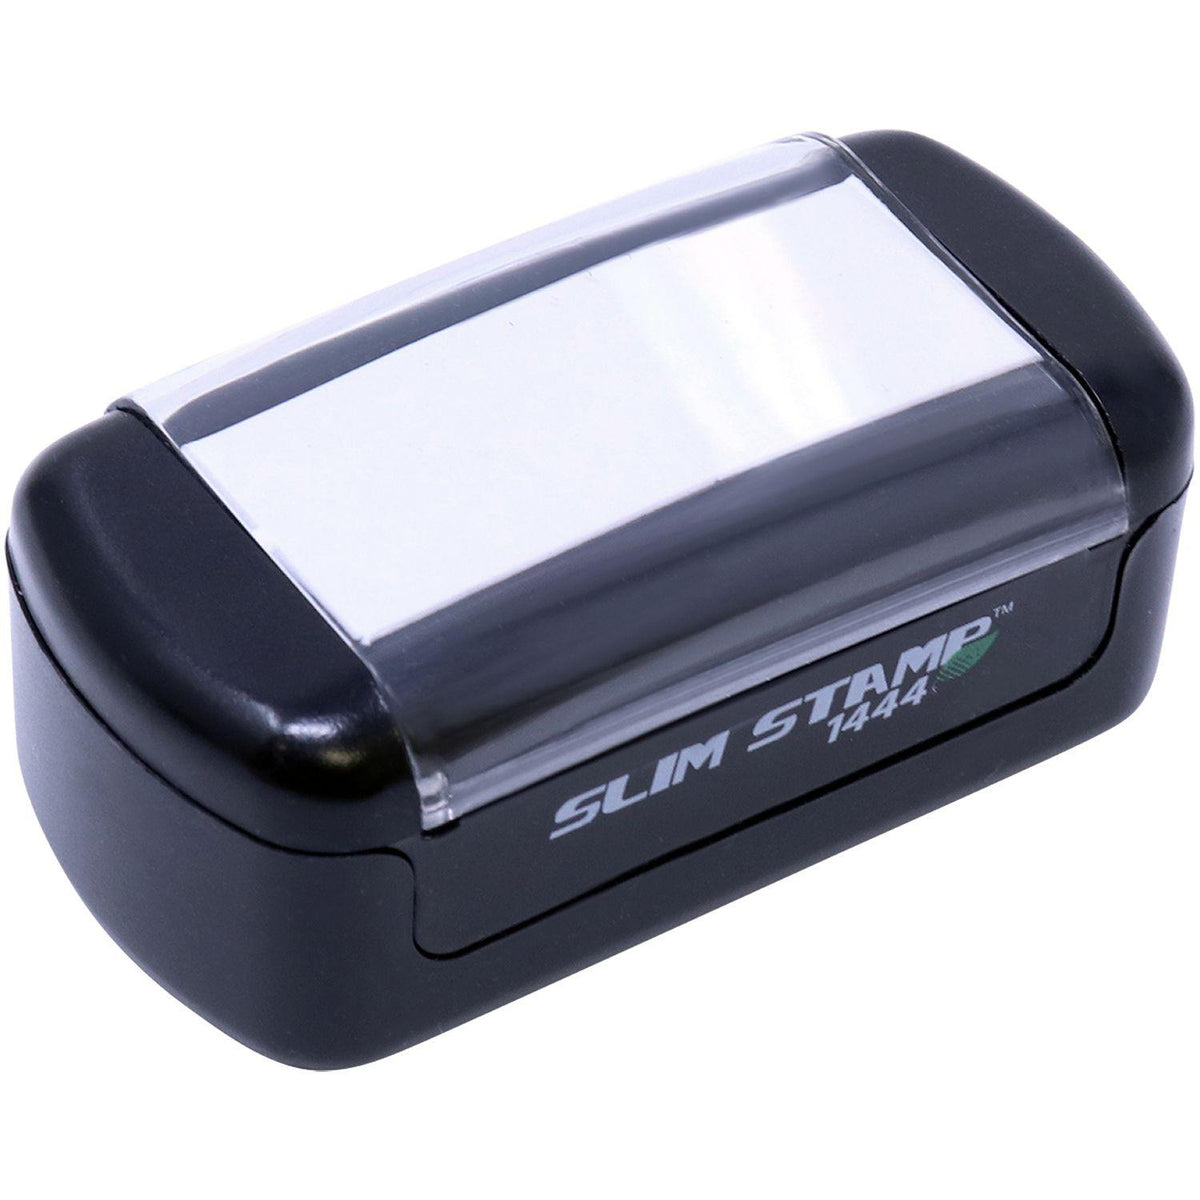 Slim Pre-Inked Bold Completed Stamp - Engineer Seal Stamps - Brand_Slim, Impression Size_Small, Stamp Type_Pre-Inked Stamp, Type of Use_General, Type of Use_Office